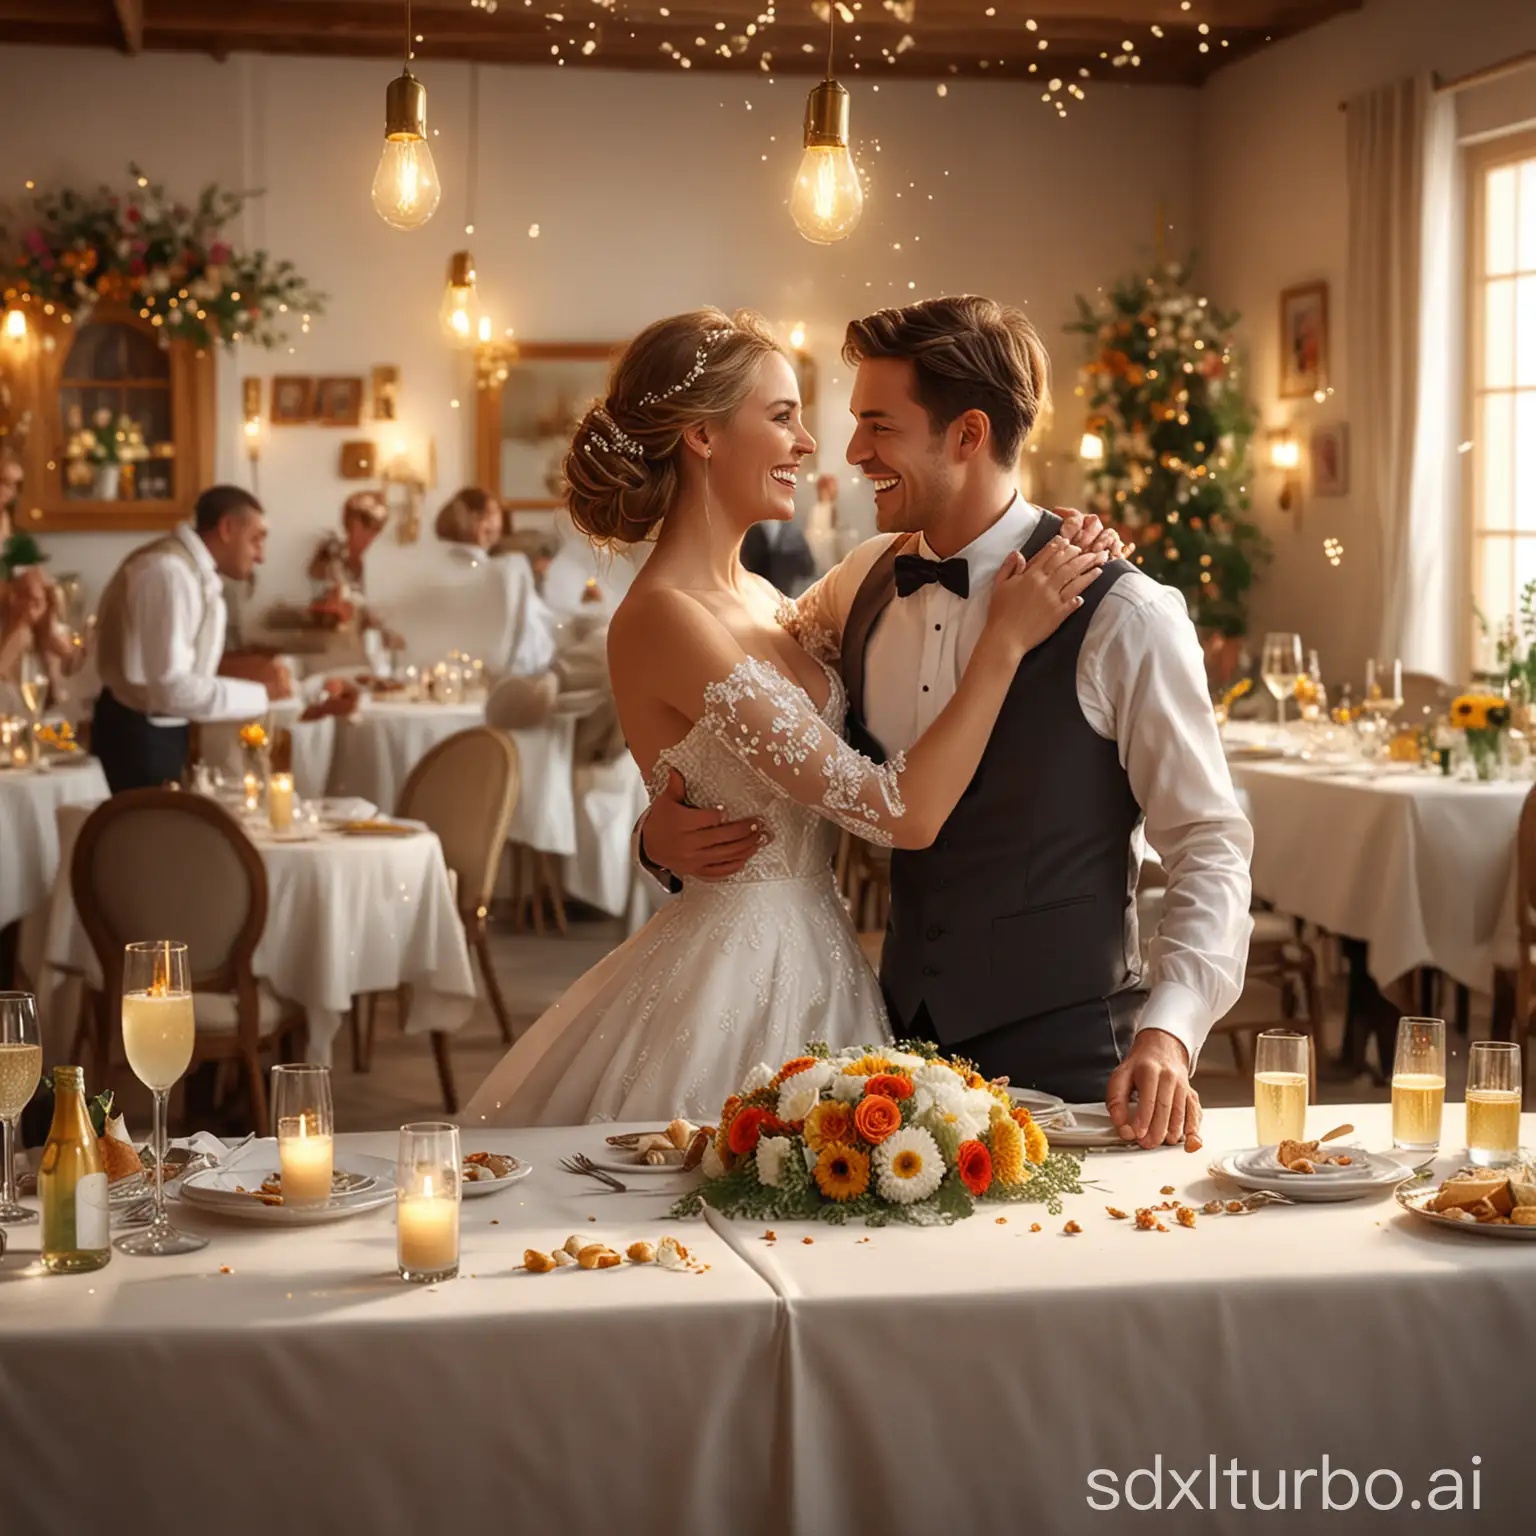 A photorealistic image of a wedding in a restaurant with warm lighting. In the center there are newlyweds dressed in elegant outfits, smiling, hugging. In the background there is a festive table decorated with white tablecloths, golden appliances, candles, bouquets of flowers. Guests in bright outfits are having fun, dancing, drinking champagne. There is a festive mood in the air, sparks from champagne, bright flowers, soft light, happy faces. Detailing on fabrics, dishes, decorative elements.